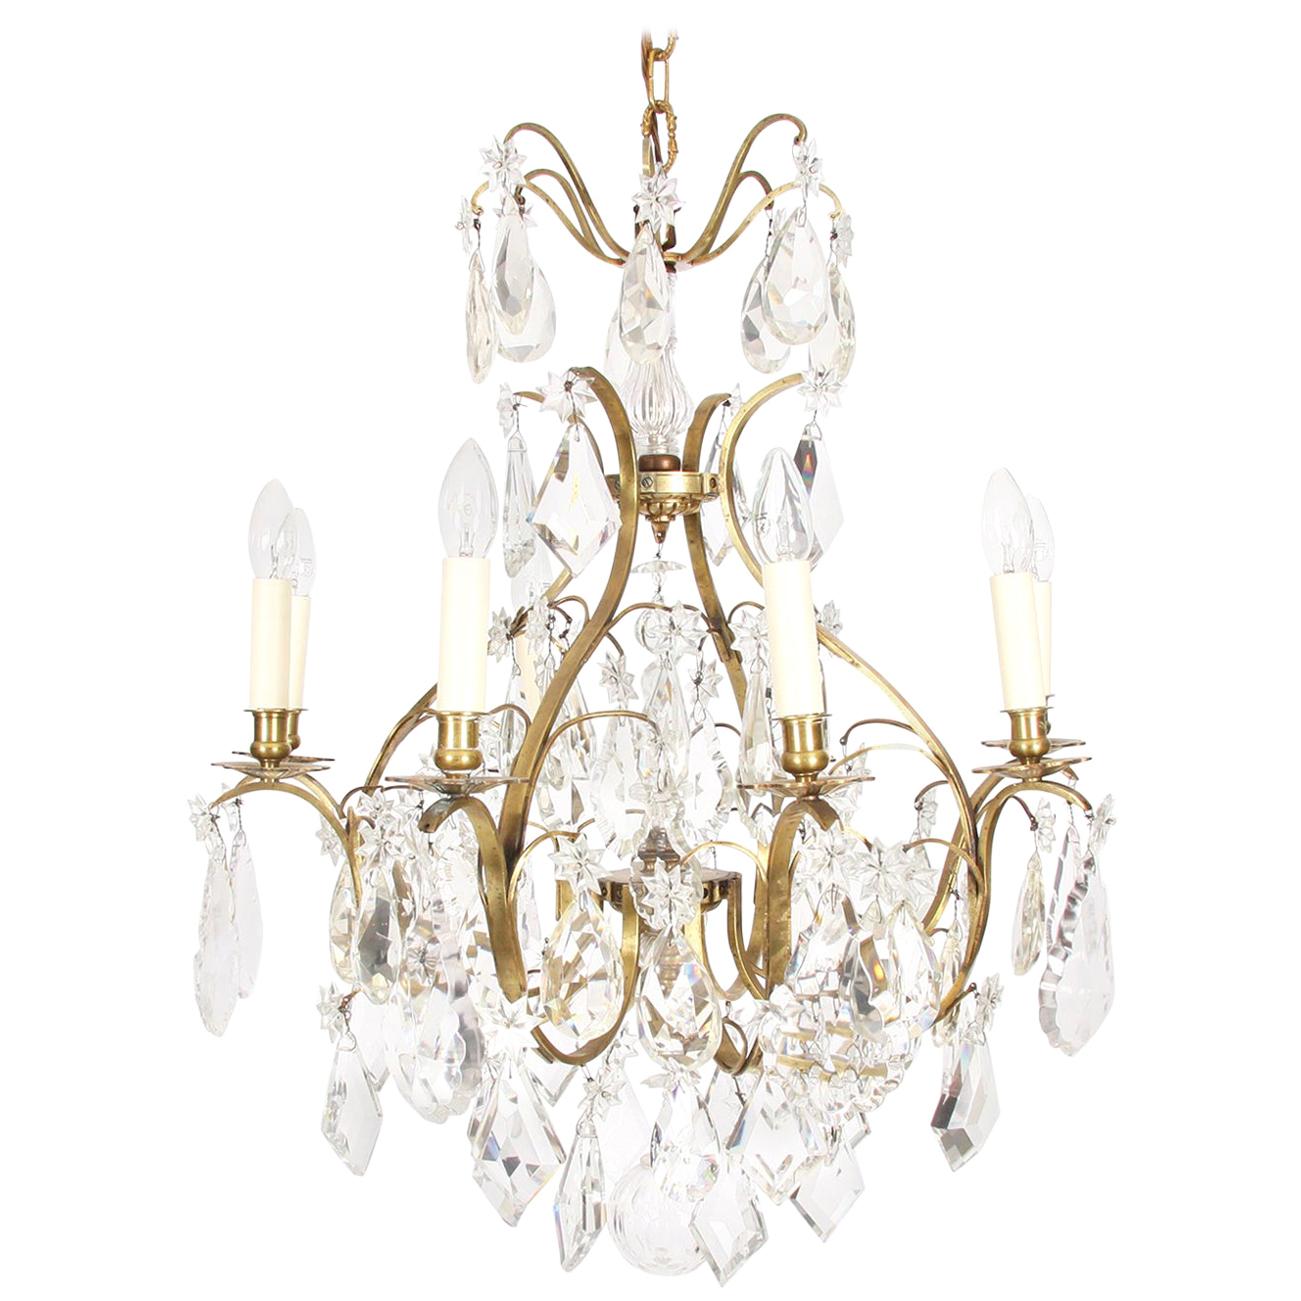 French Early 20th Century Antique Crystal Chandelier with Drops and Stars